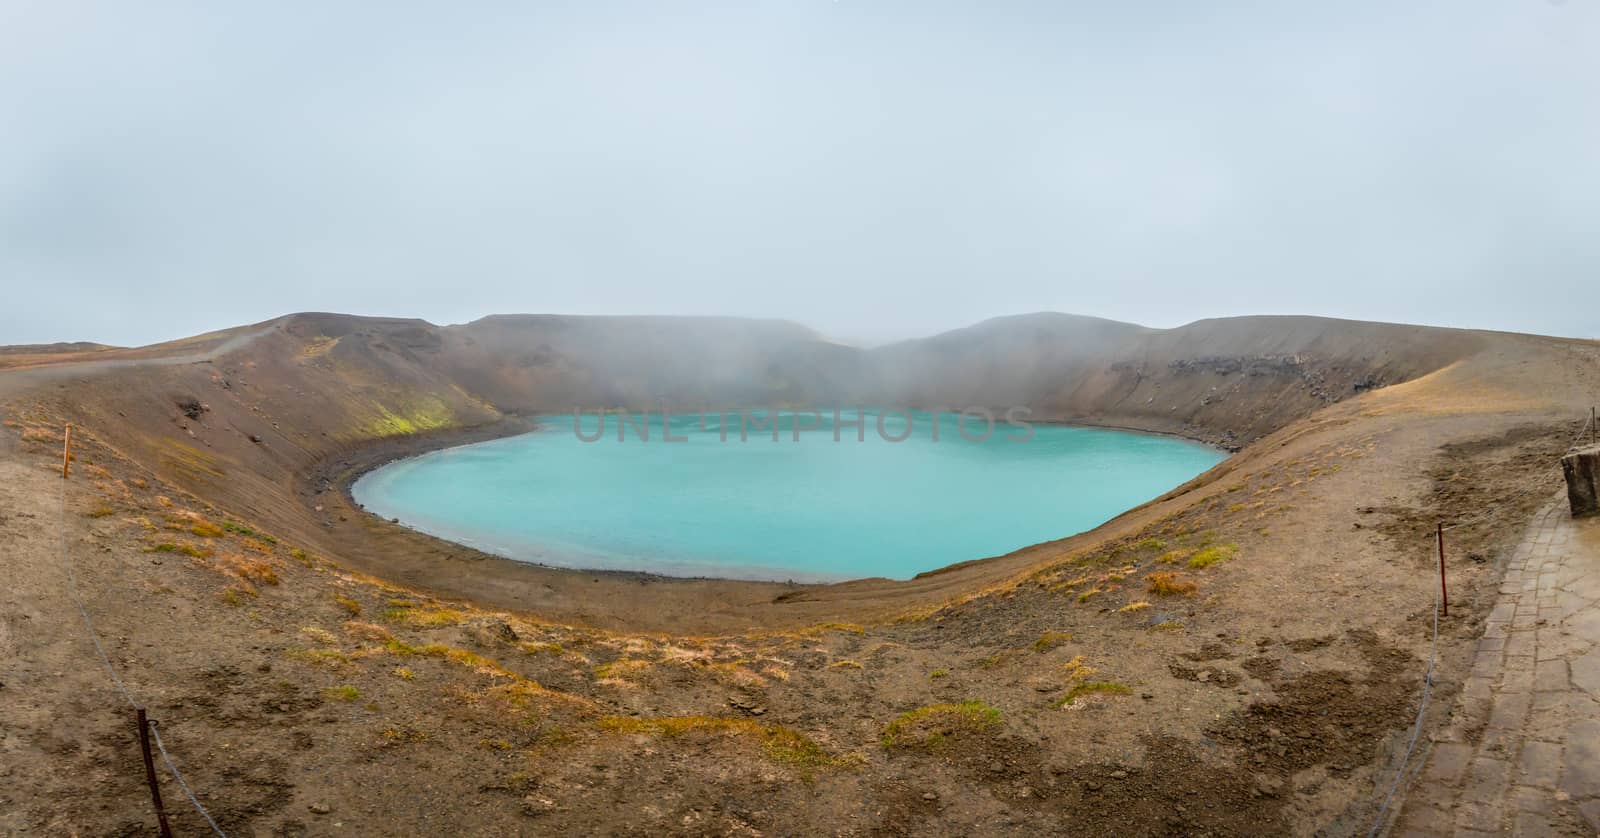 Krafla volcano in Iceland crater lake filled with hot turquoise water by MXW_Stock